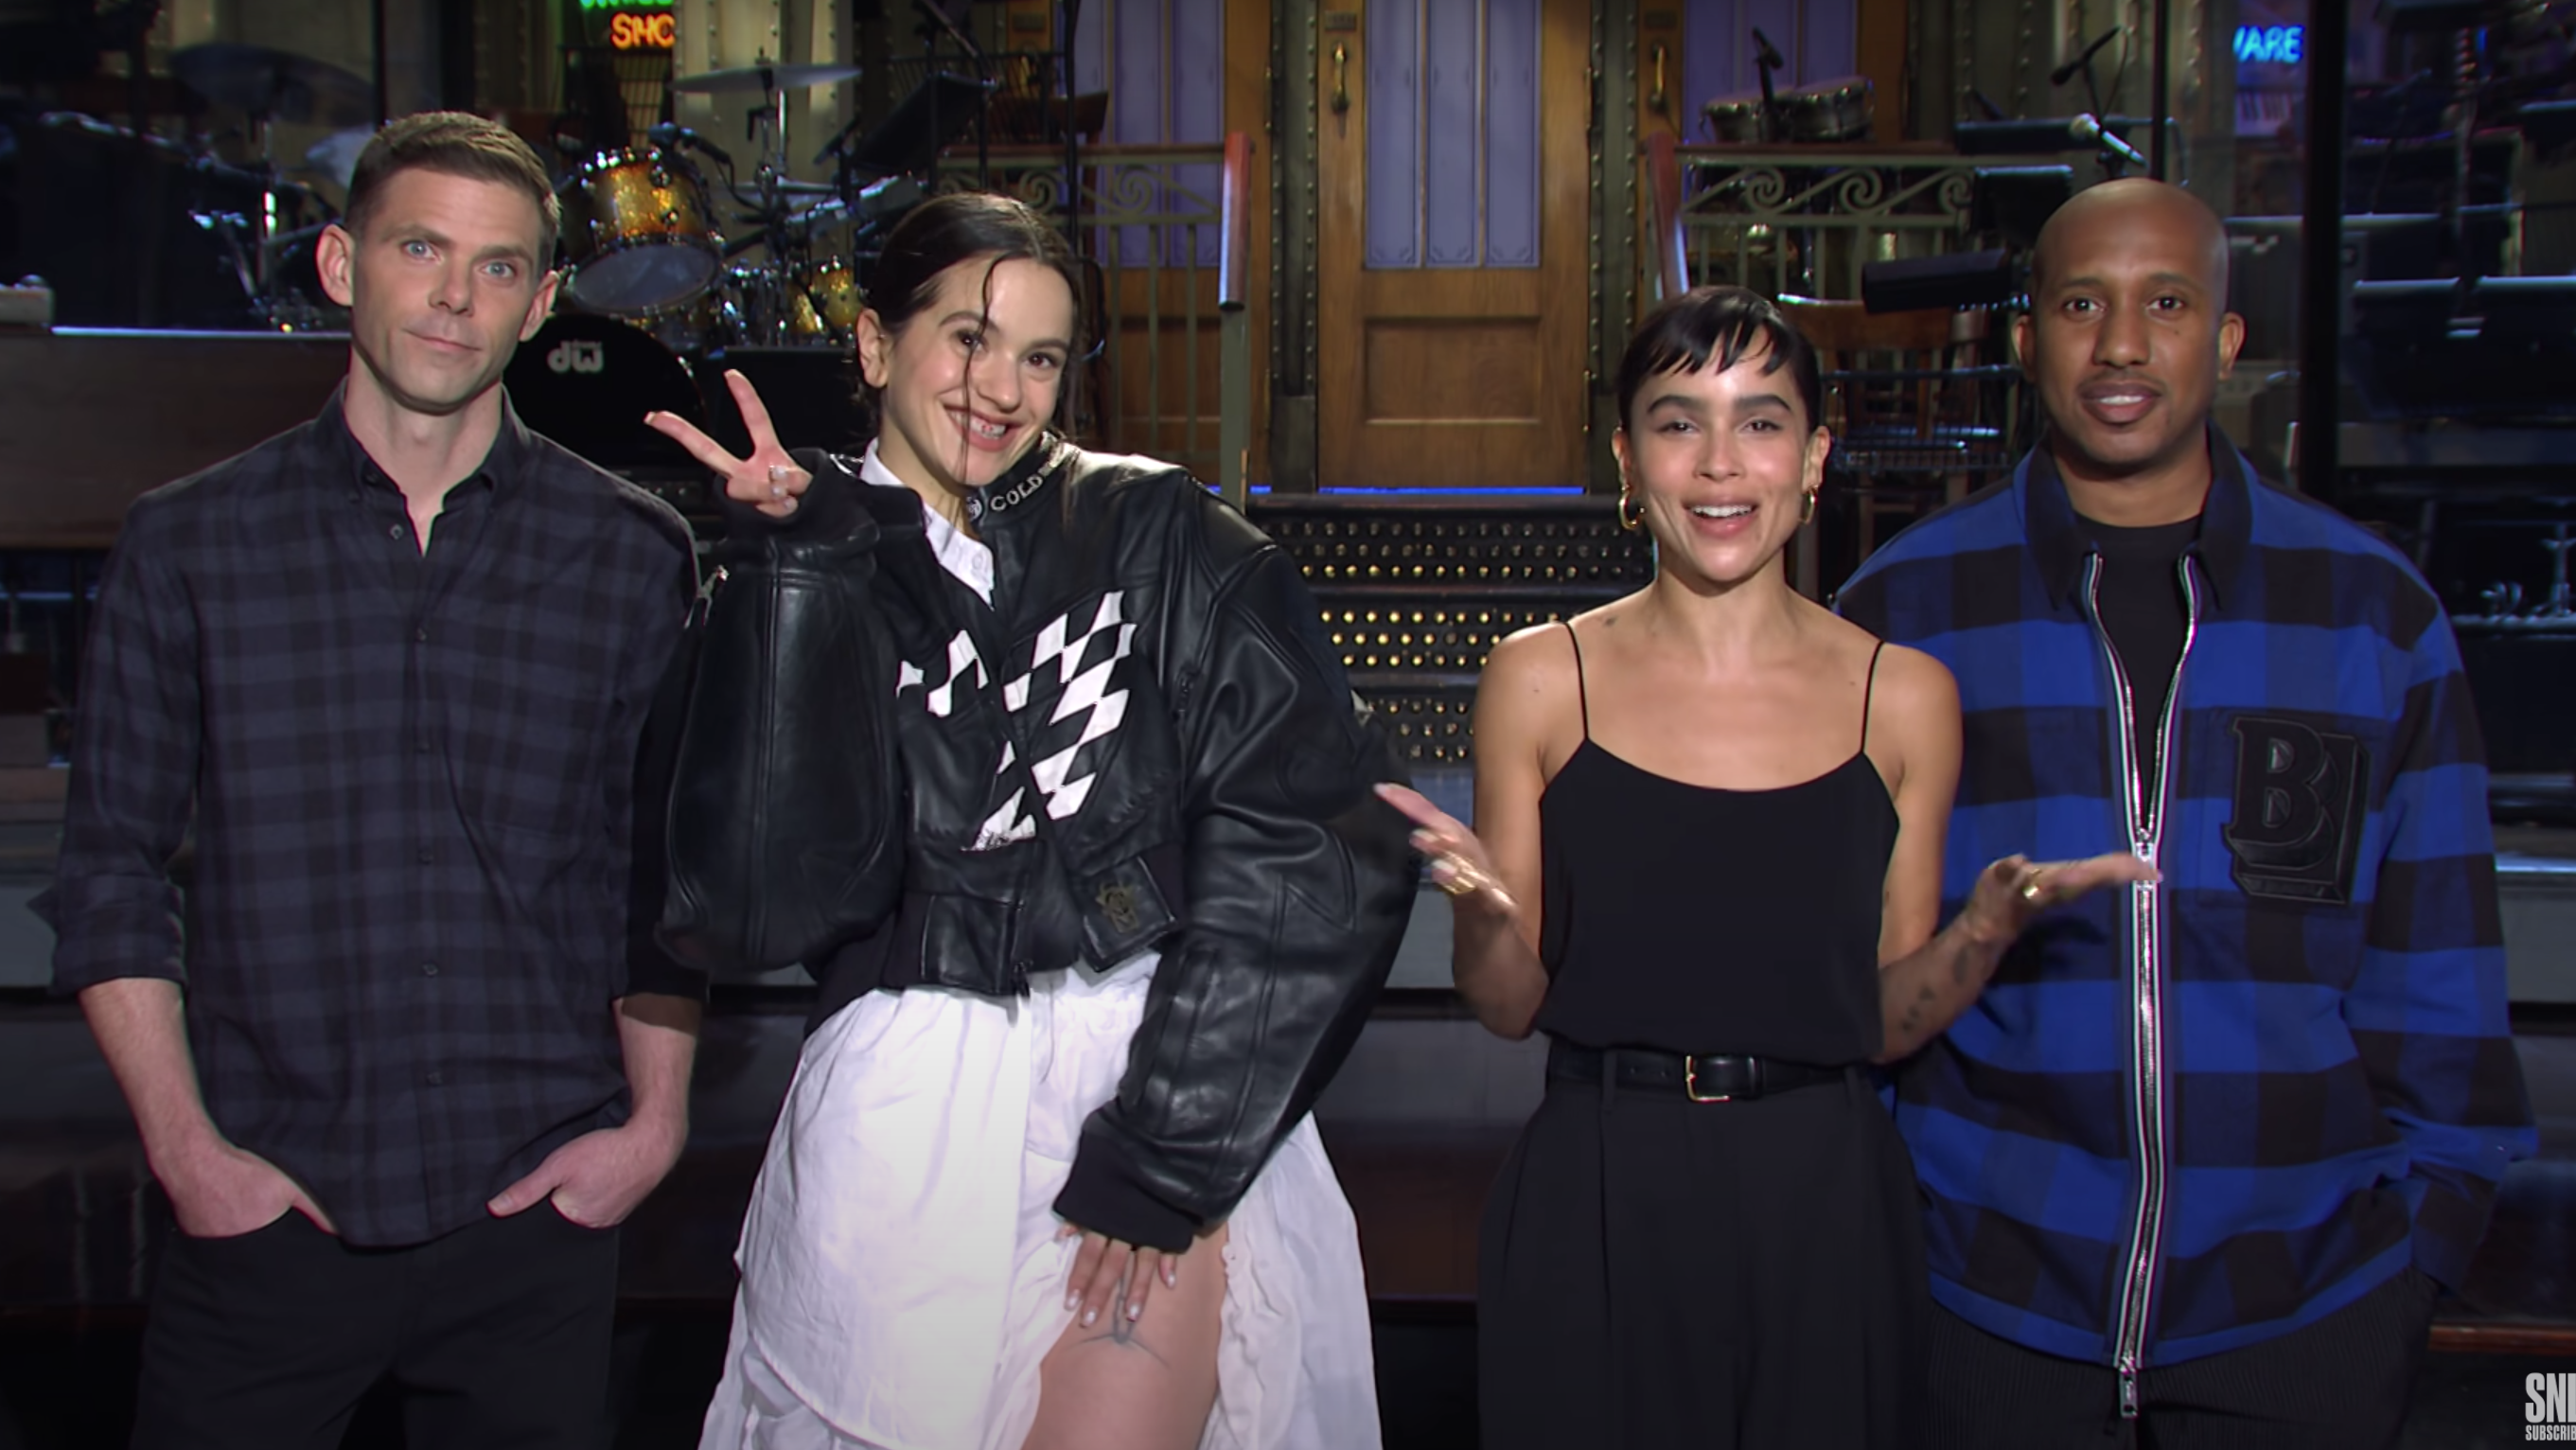 Zoë Kravitz, Rosalía joke about ditching Mikey Day and Chris Redd ahead of this week’s SNL